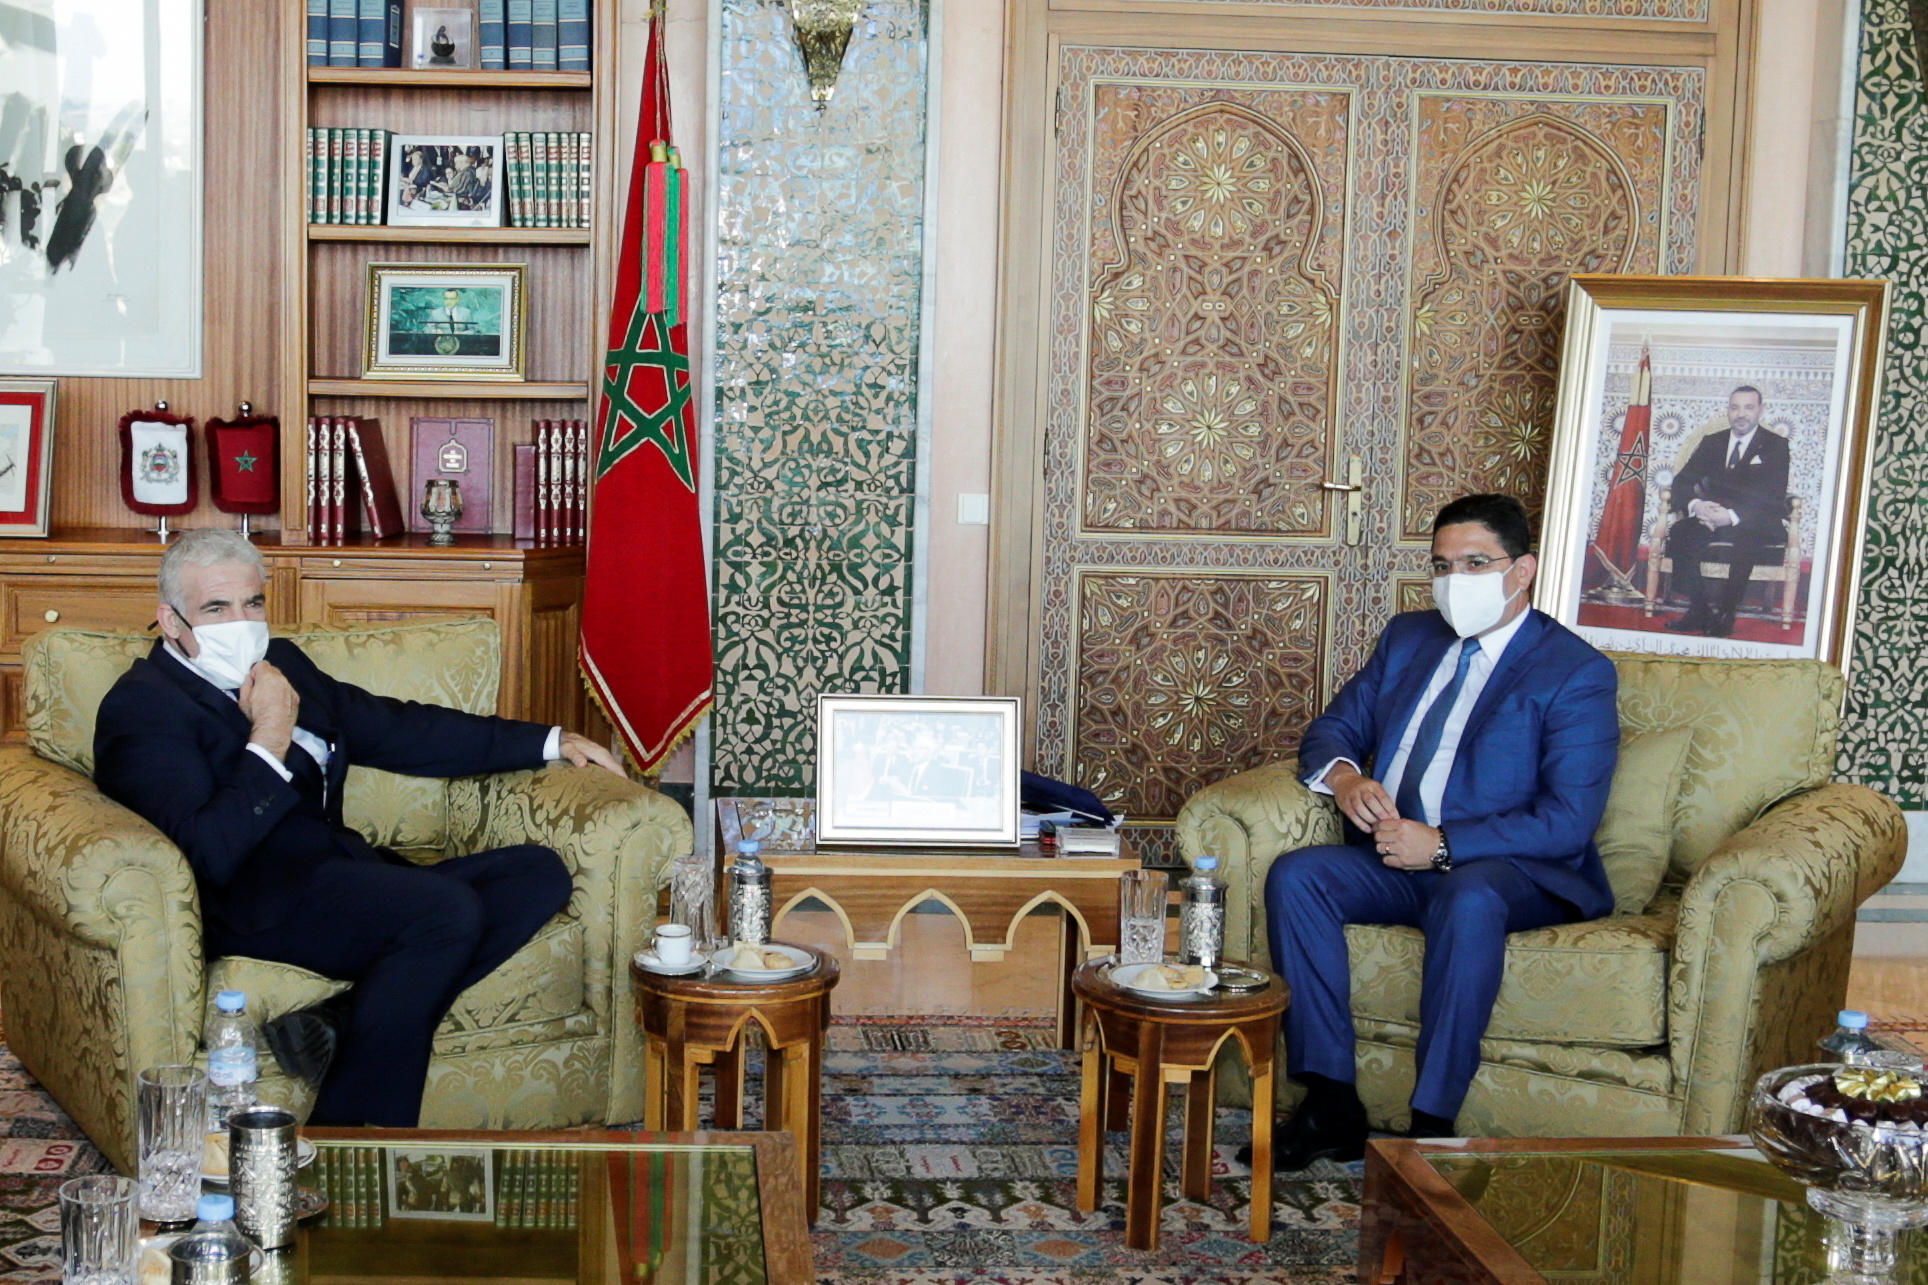 Israeli Foreign Minister Lapid meets with Moroccan Foreign Minister Bourita, in Rabat